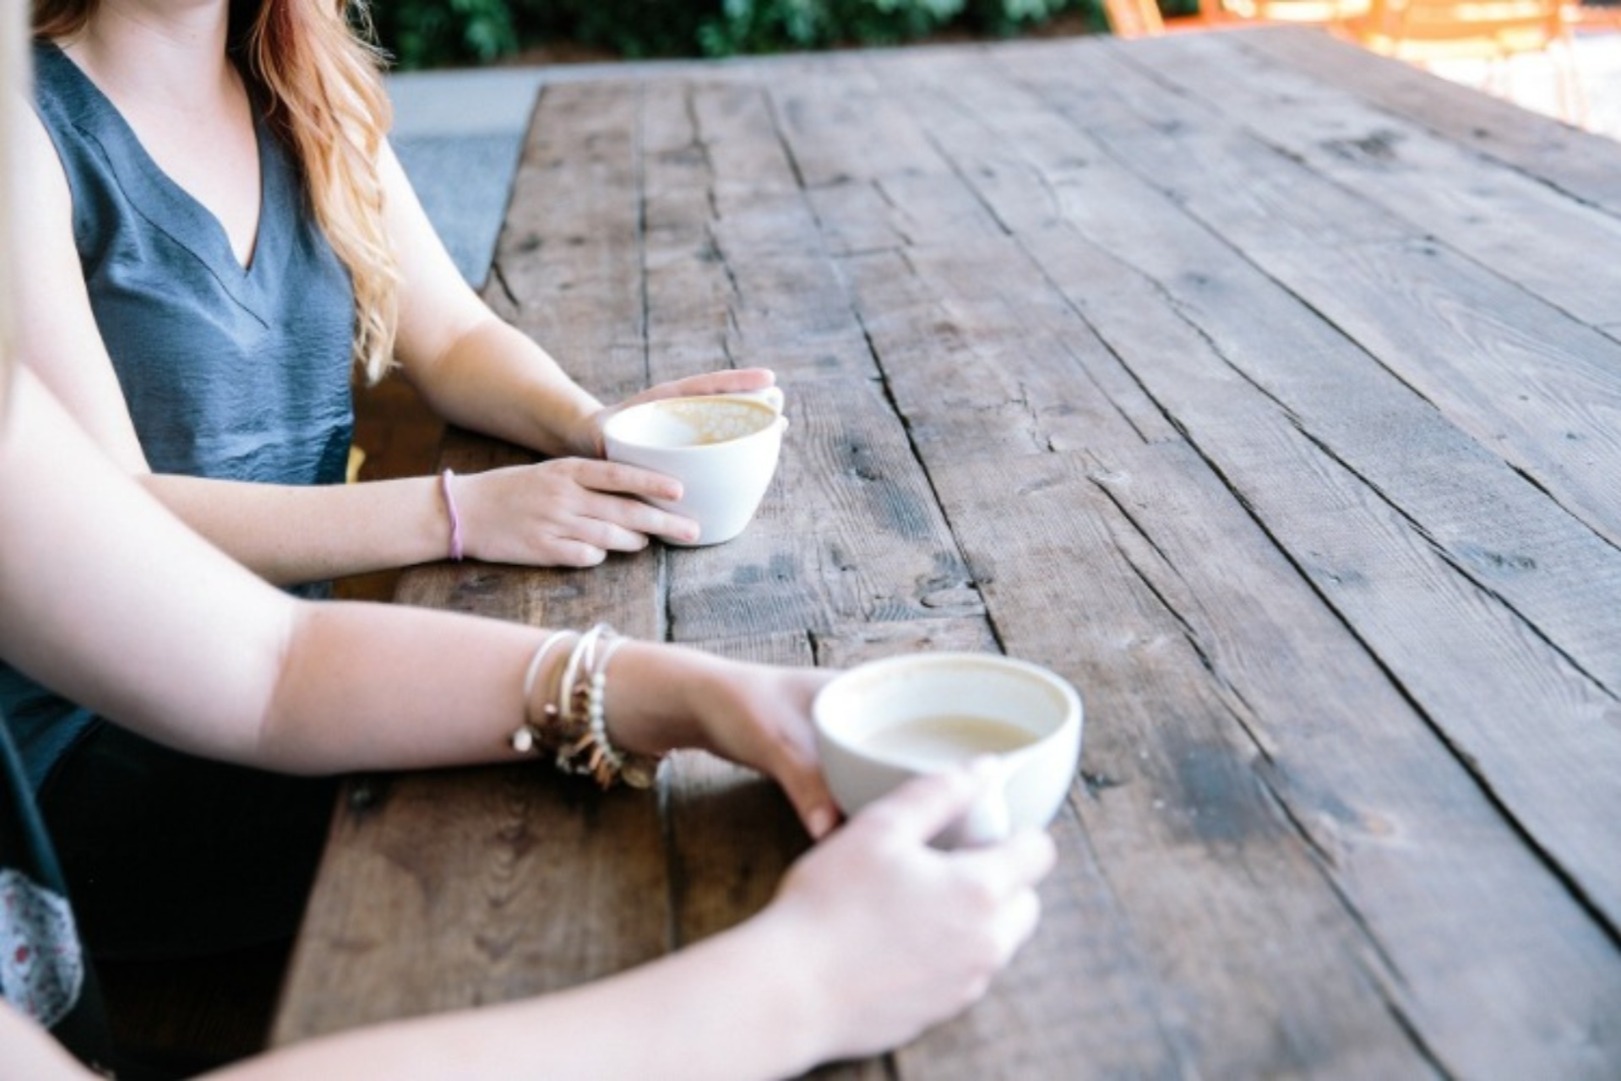 Two people sit at a wooden table chatting over tea and coffee